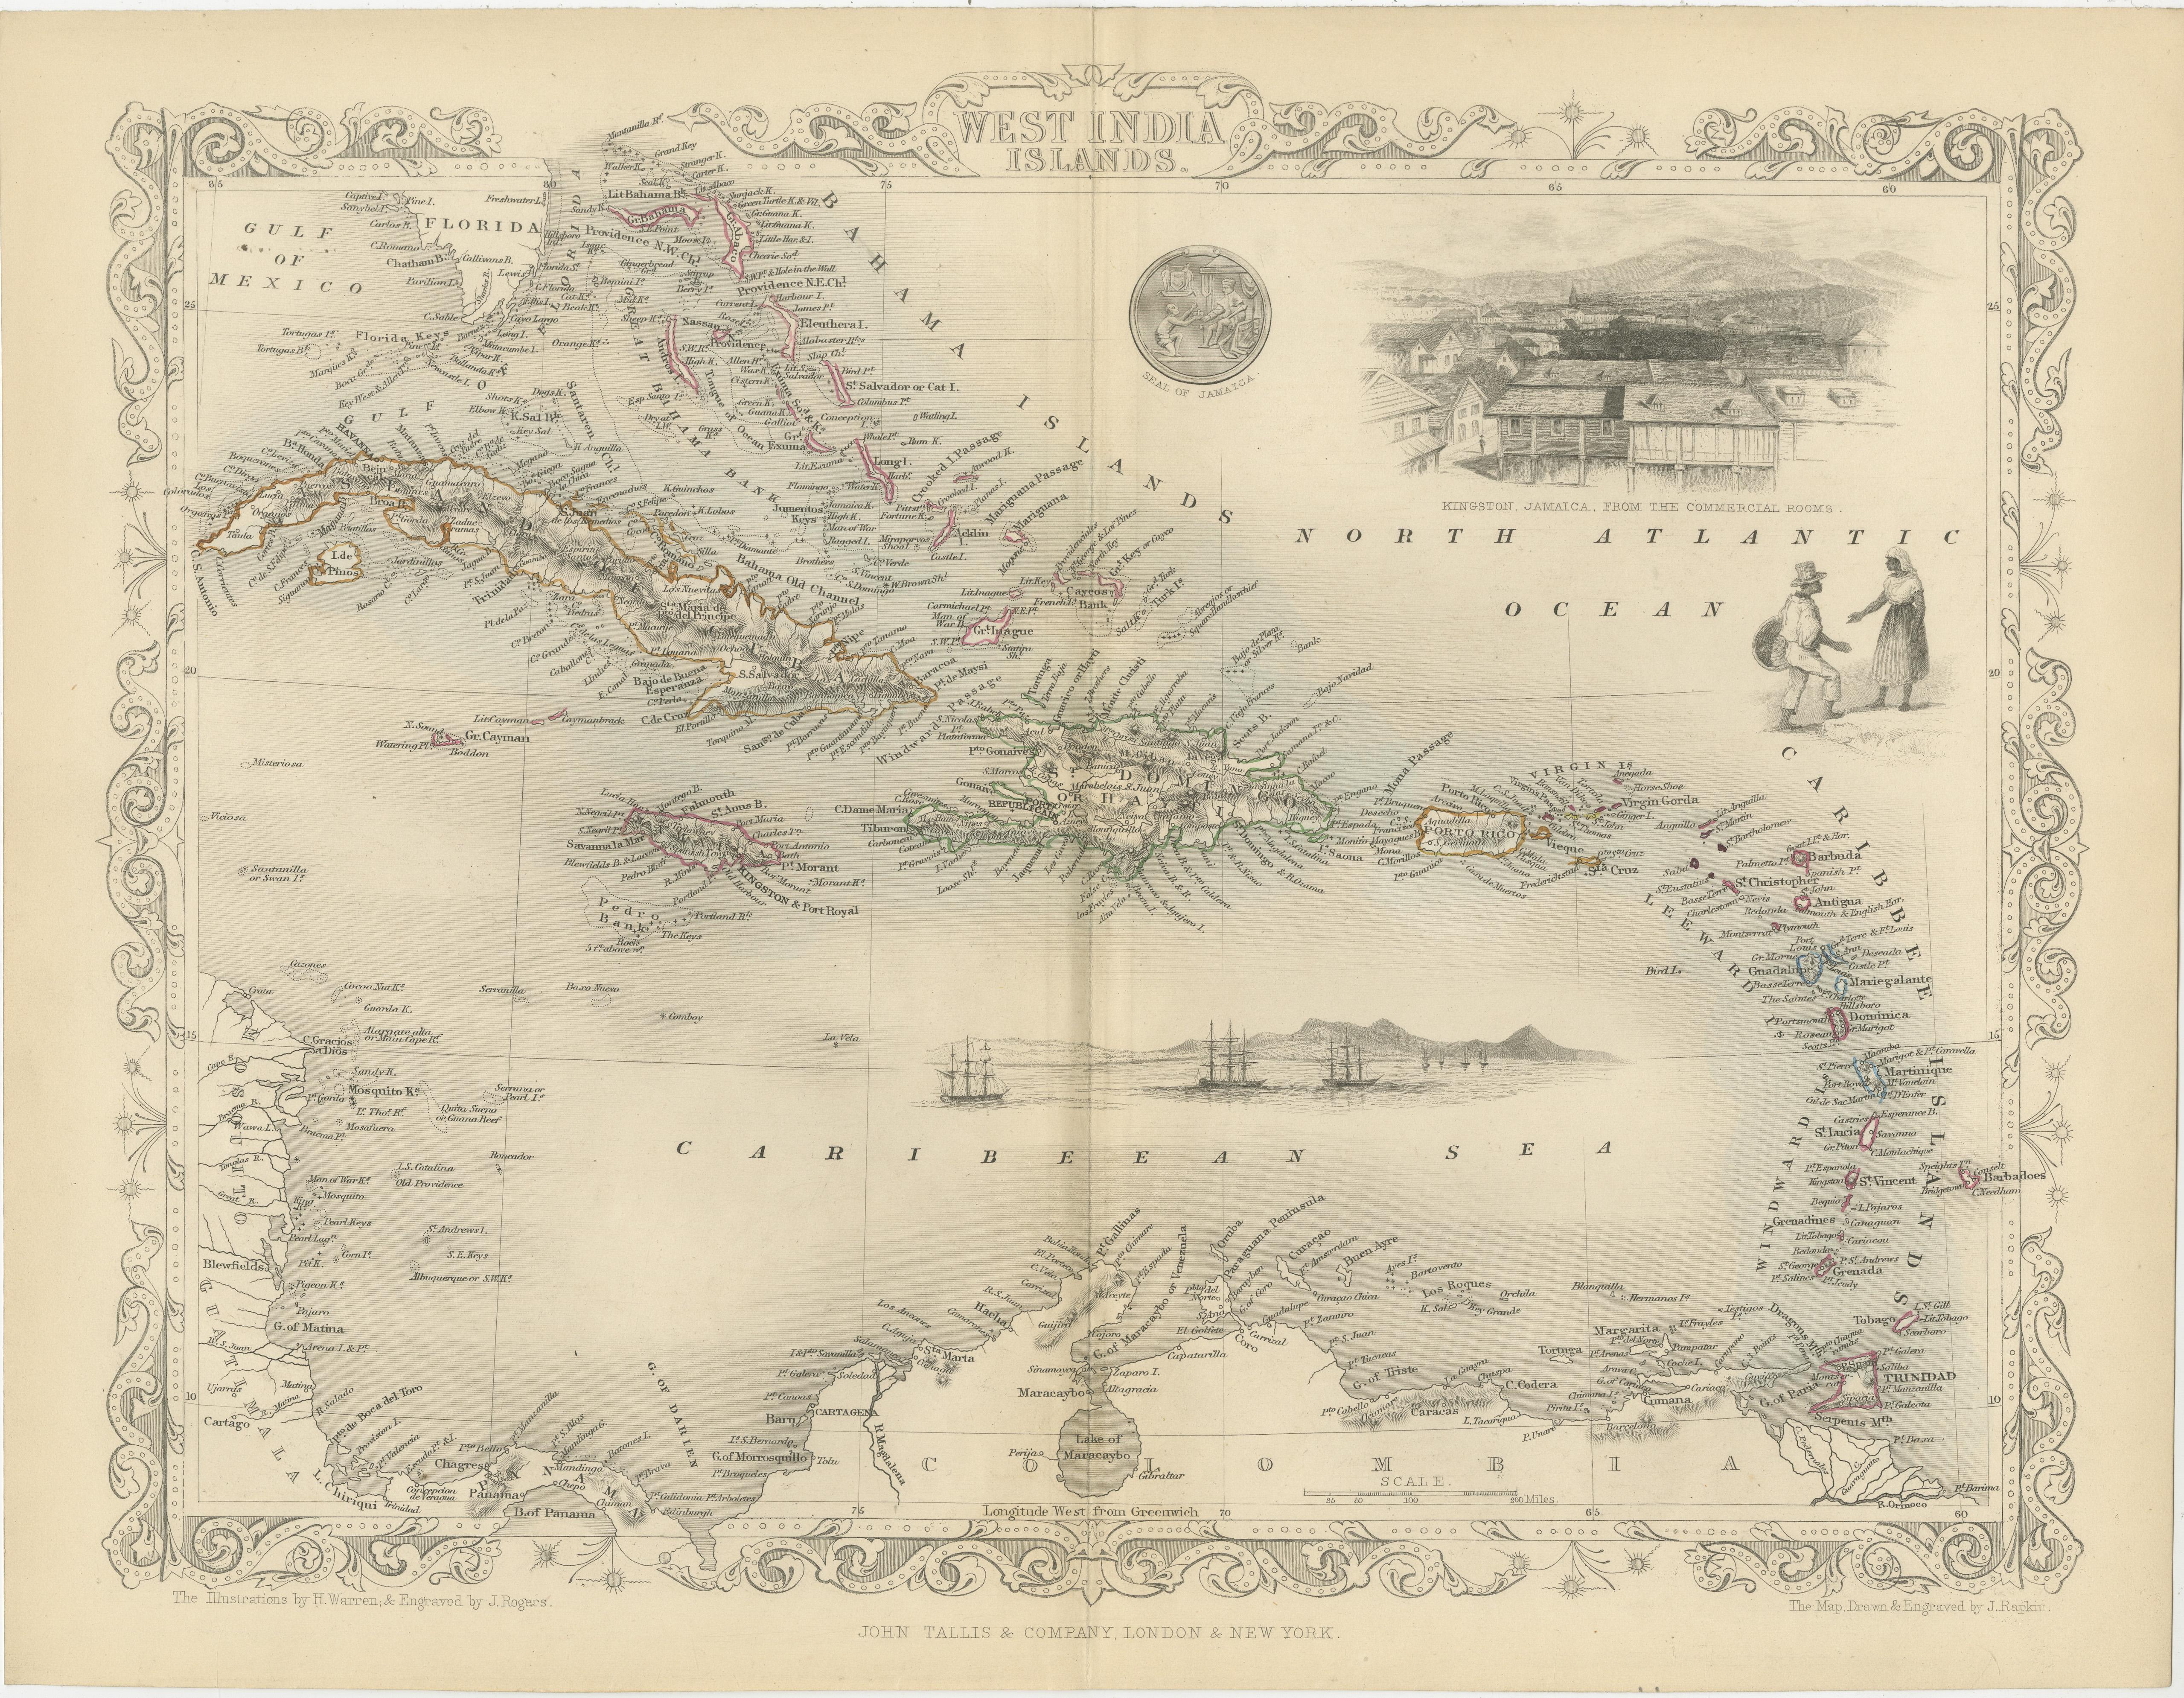 Paper Ornate Cartography of Colonial Grandeur: The West India Islands around 1851 For Sale